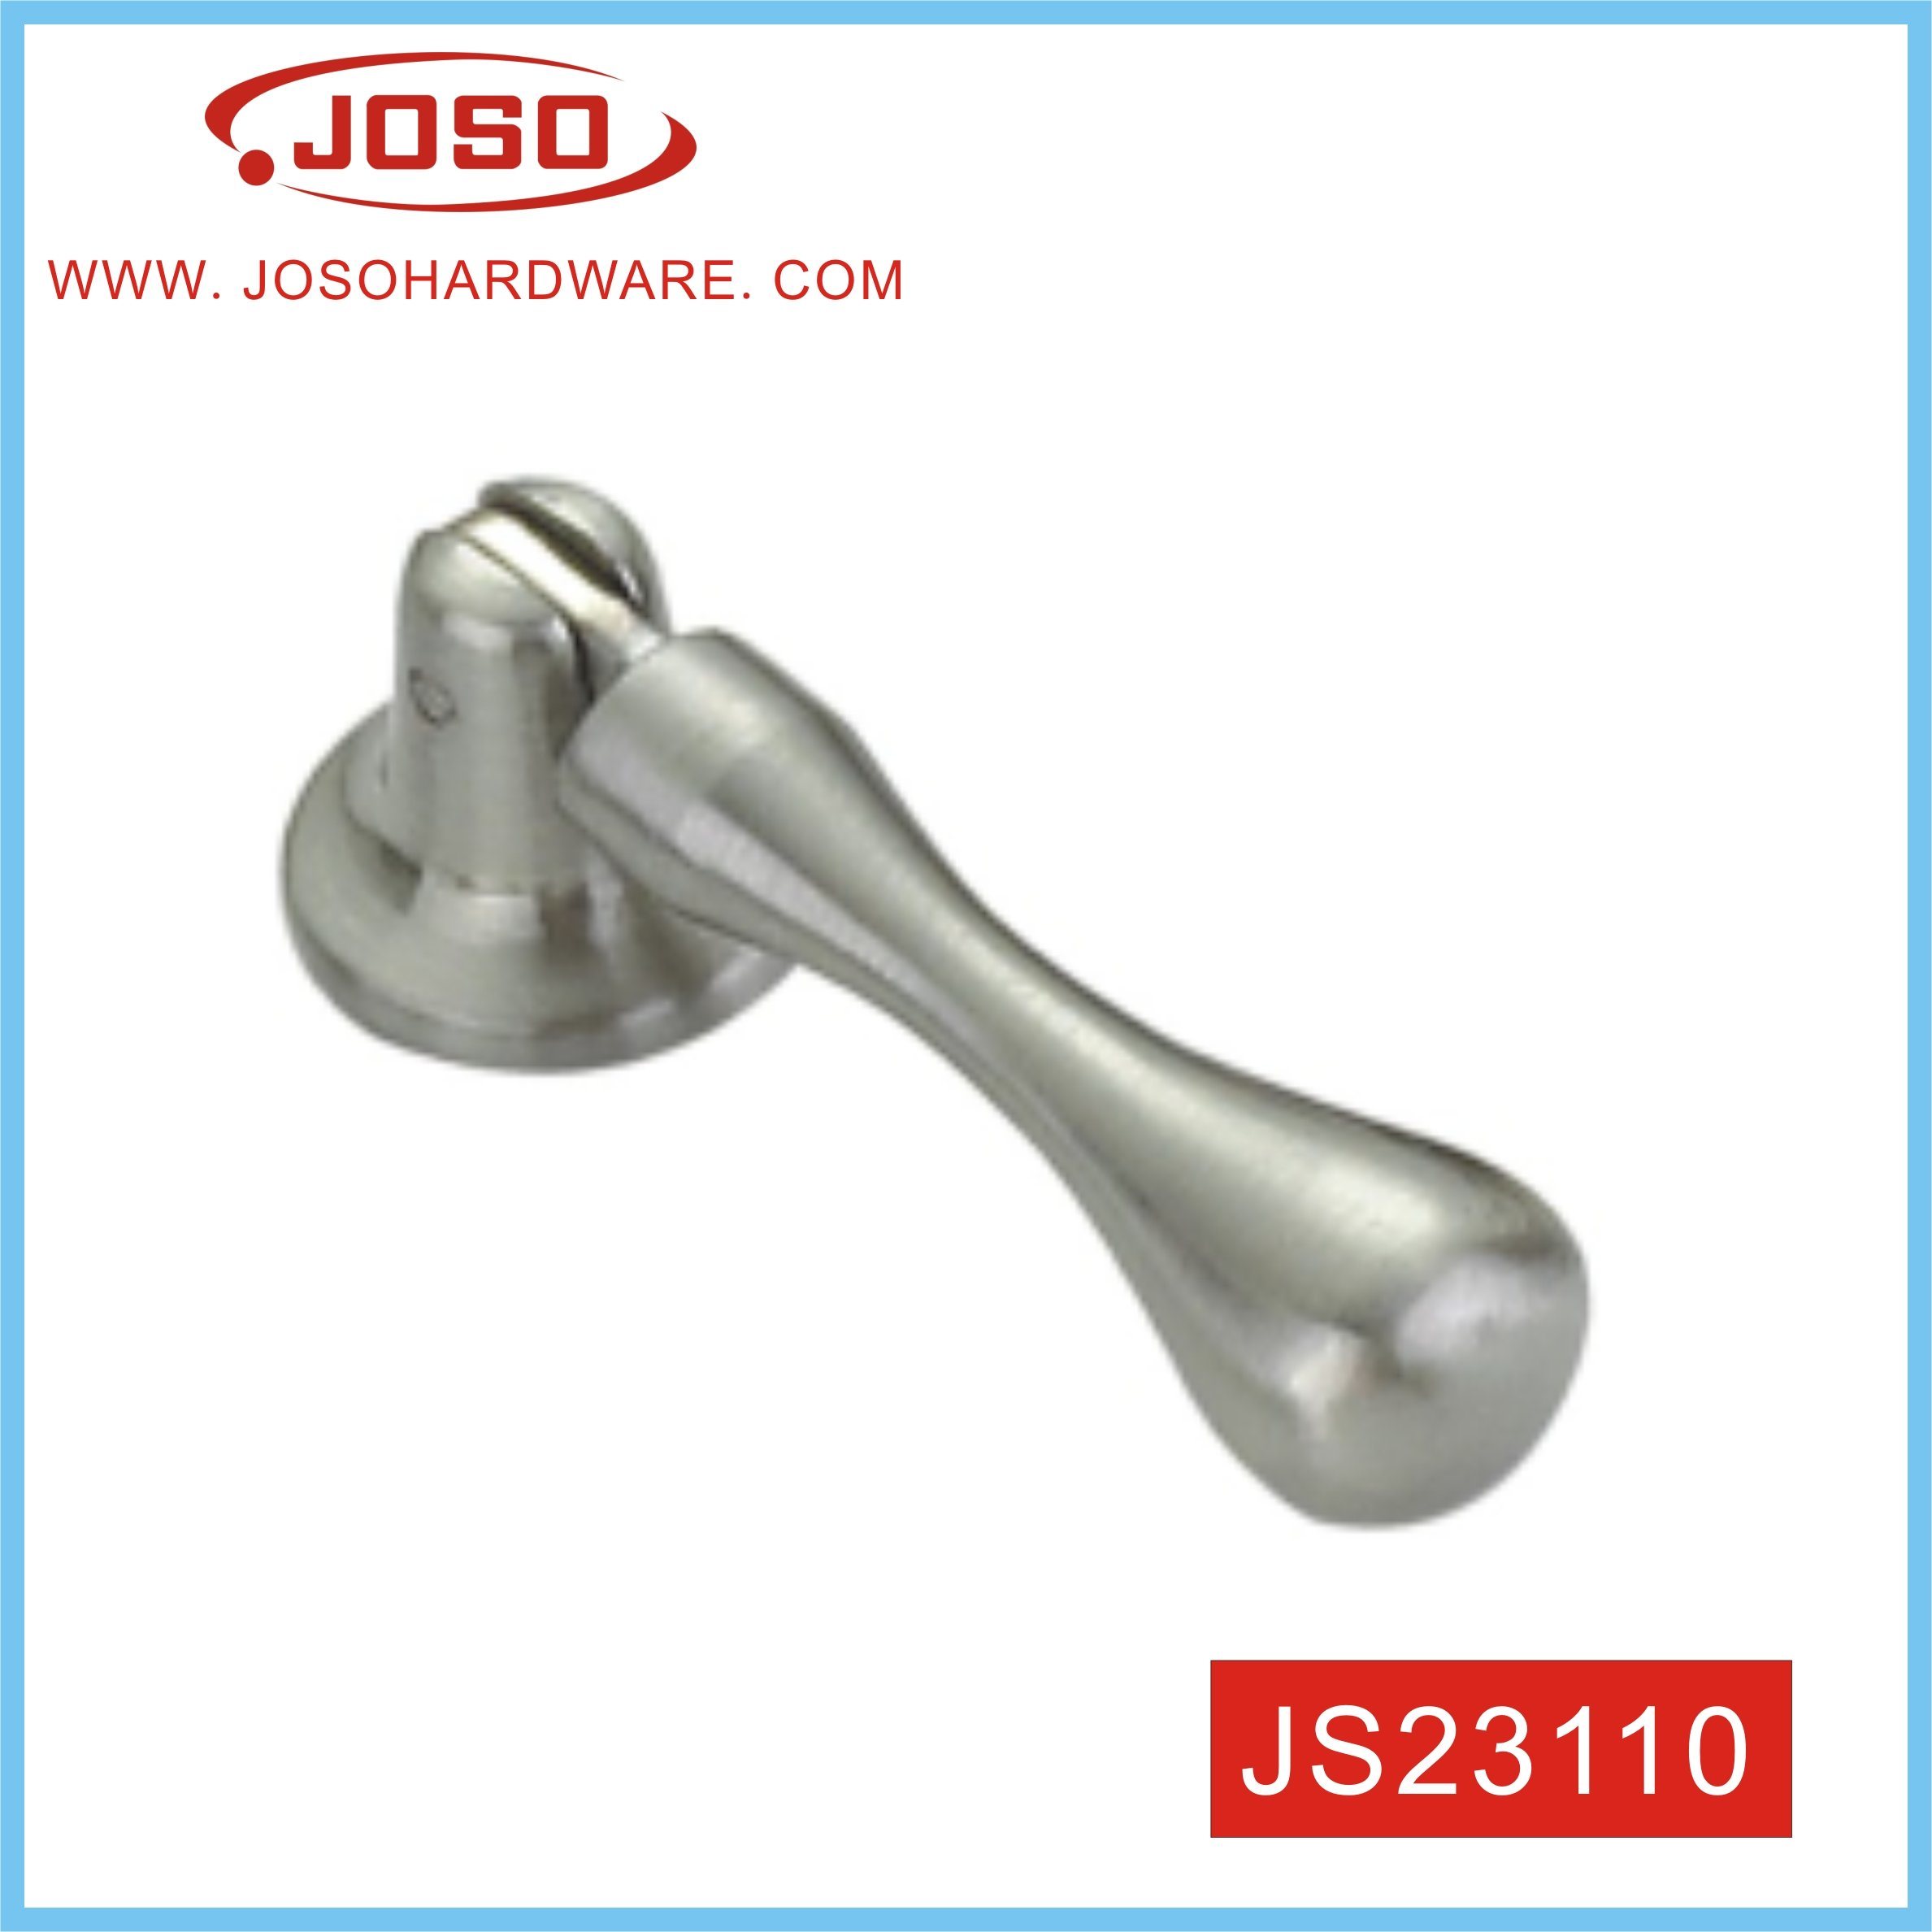 Silver Colour Furniture Pull Handle for Cabinet Drawer